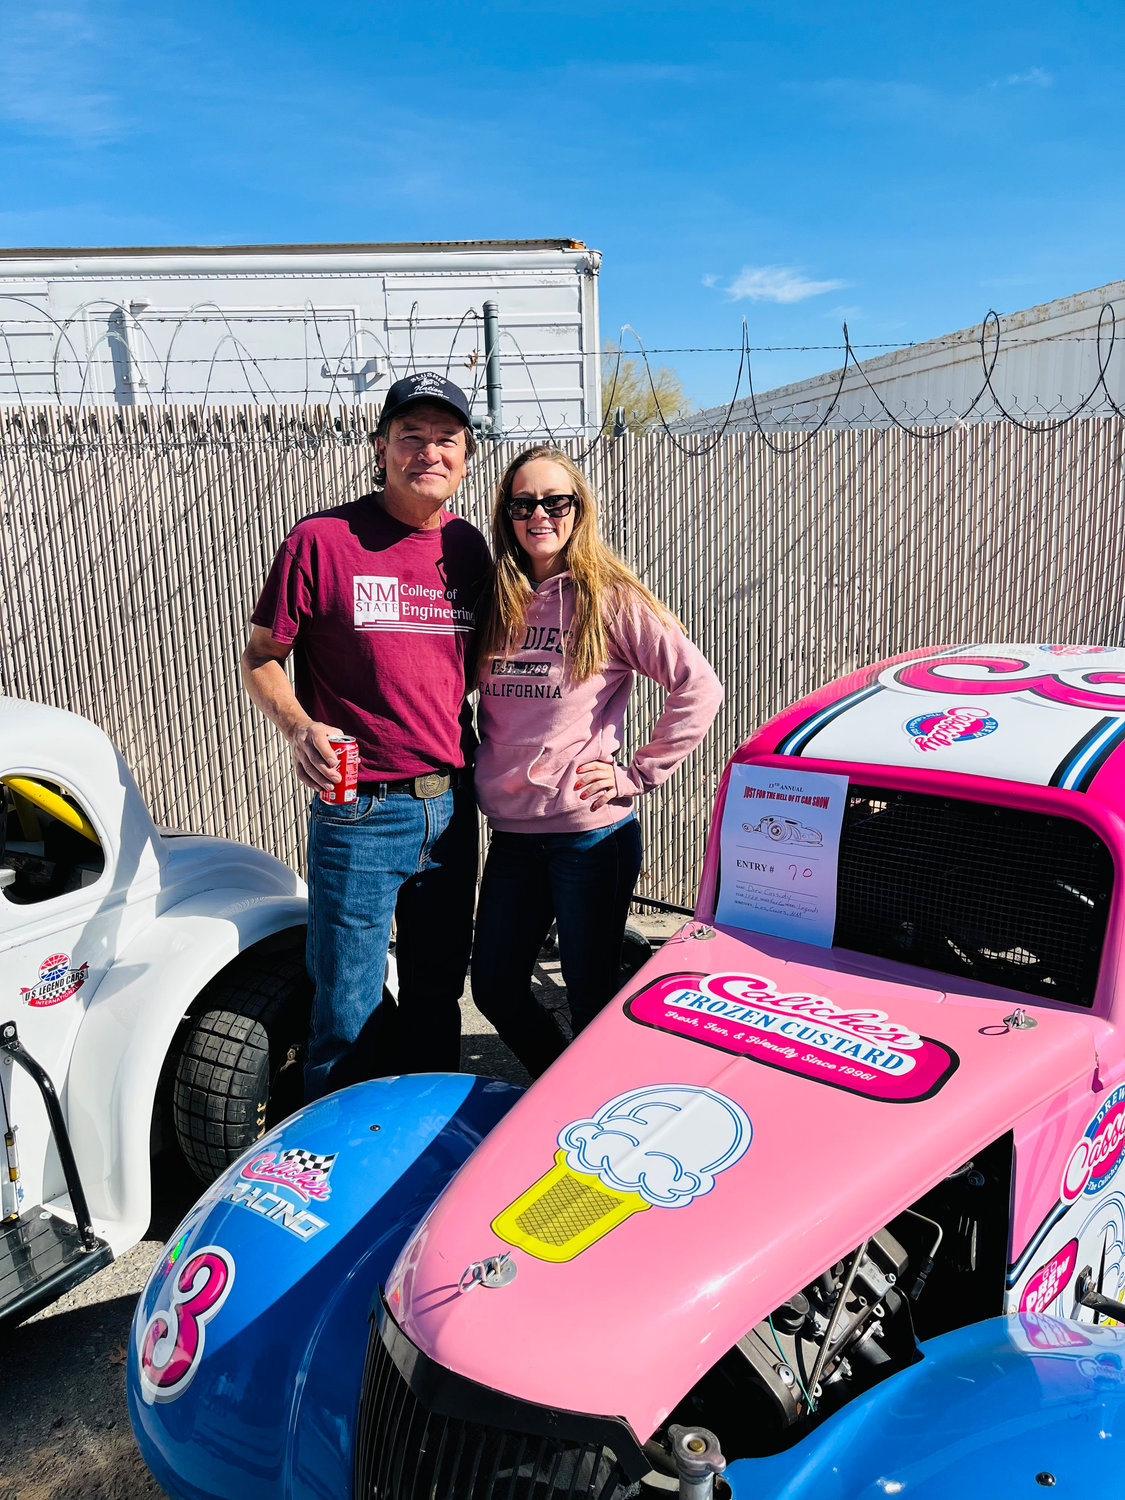 NMSU’s Ken Ruble and Drew Cassidy, both engineering alums, with the No. 3 Caliche’s race car at a local car show.